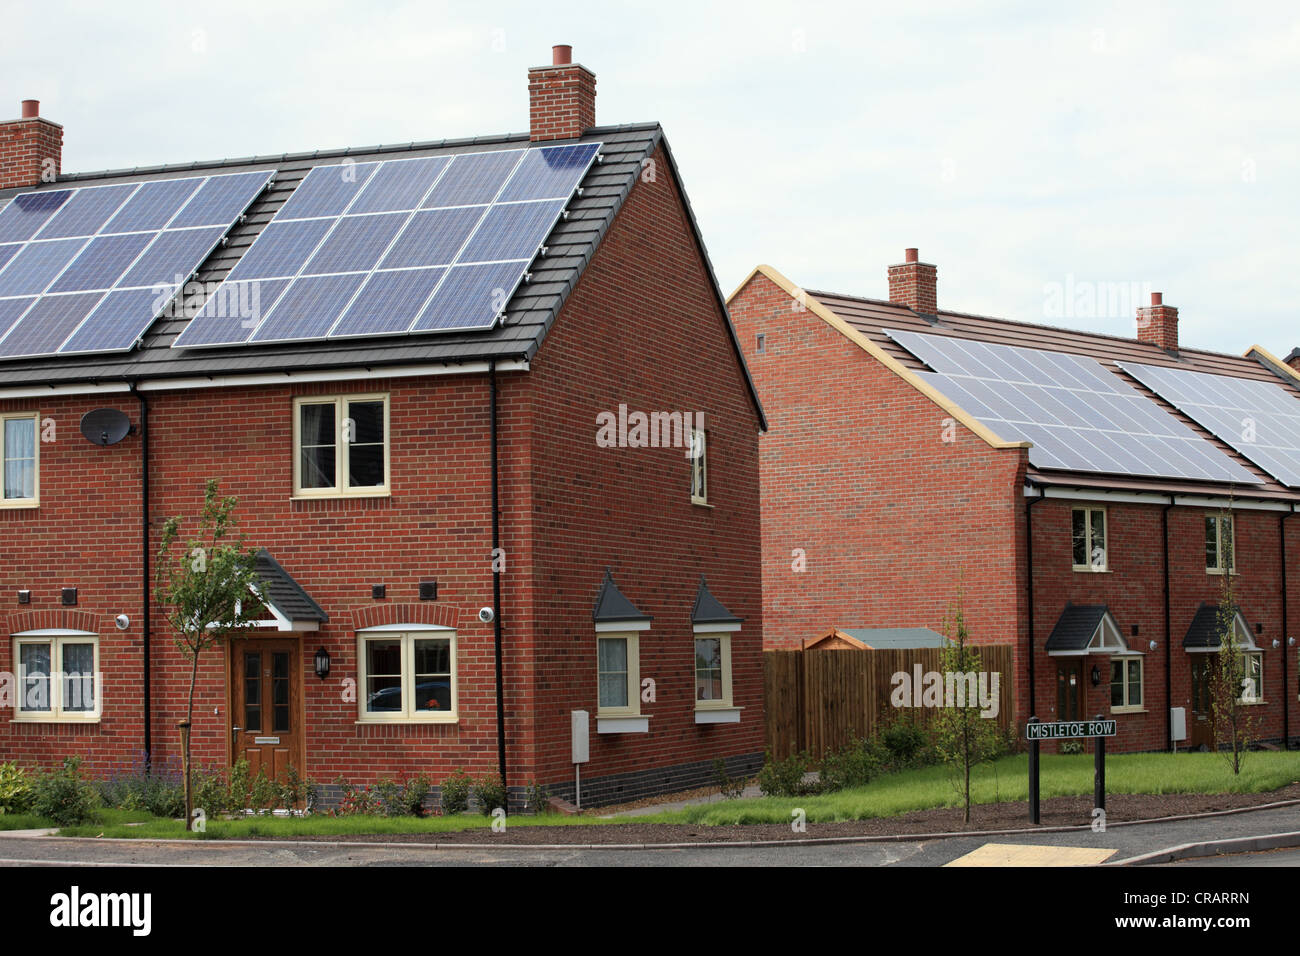 New houses (2012) which have solar panels built-in on the roofs, Tenbury Wells, Worcestershire, UK Stock Photo